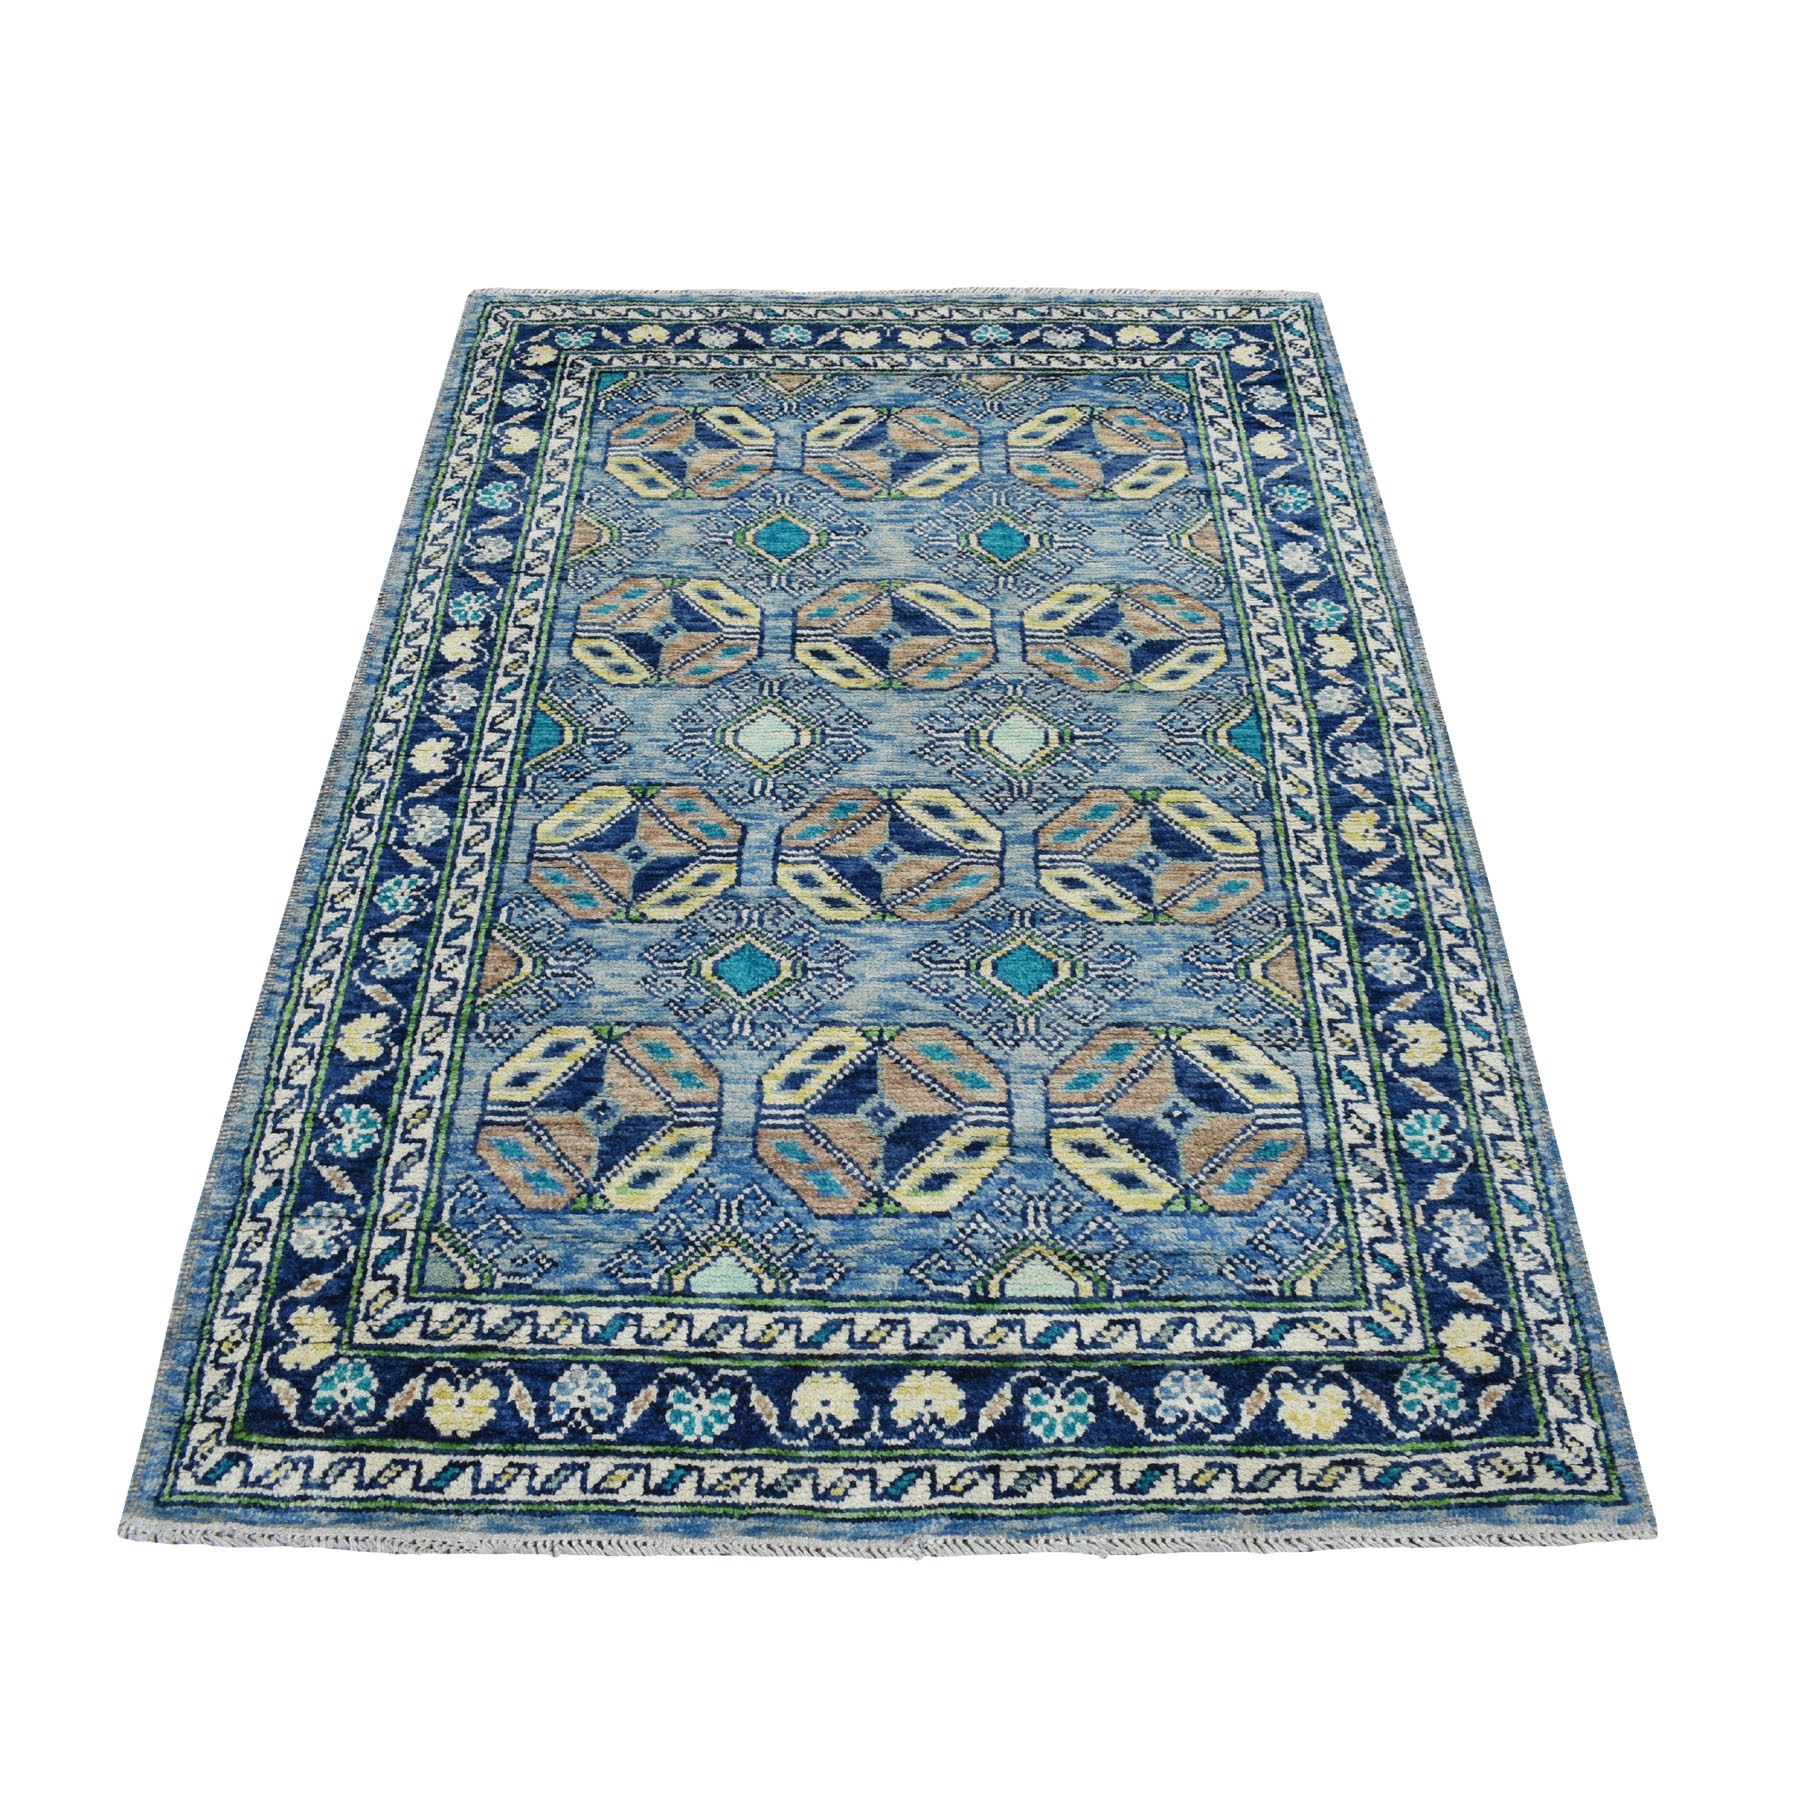 4-1 x6- Blue Tribal Design Hand Knotted Colorful Afghan Baluch Pure Wool Oriental Rug 